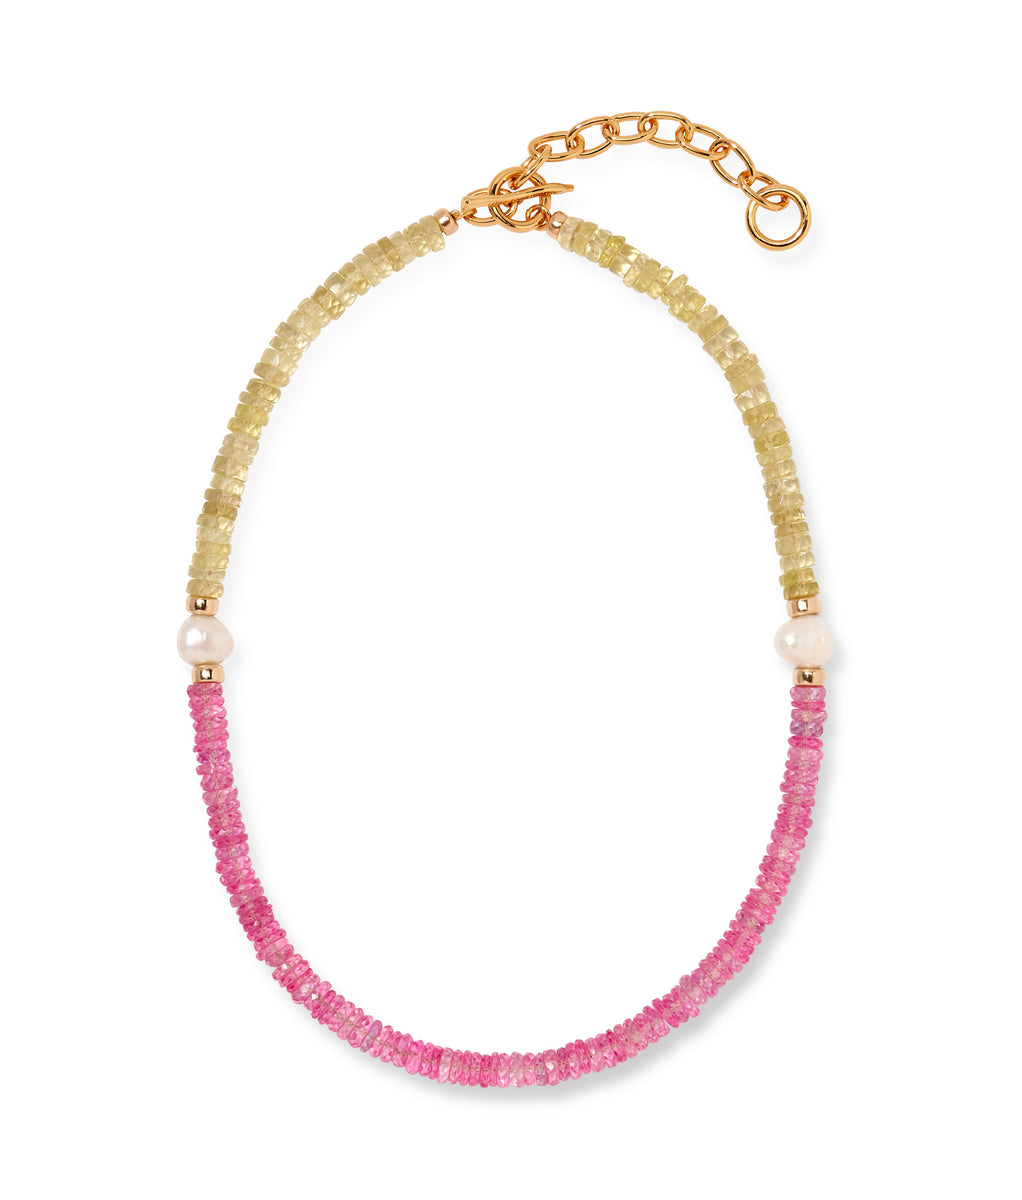 Rock Candy Necklace in Pink Lemonade | Lizzie Fortunato